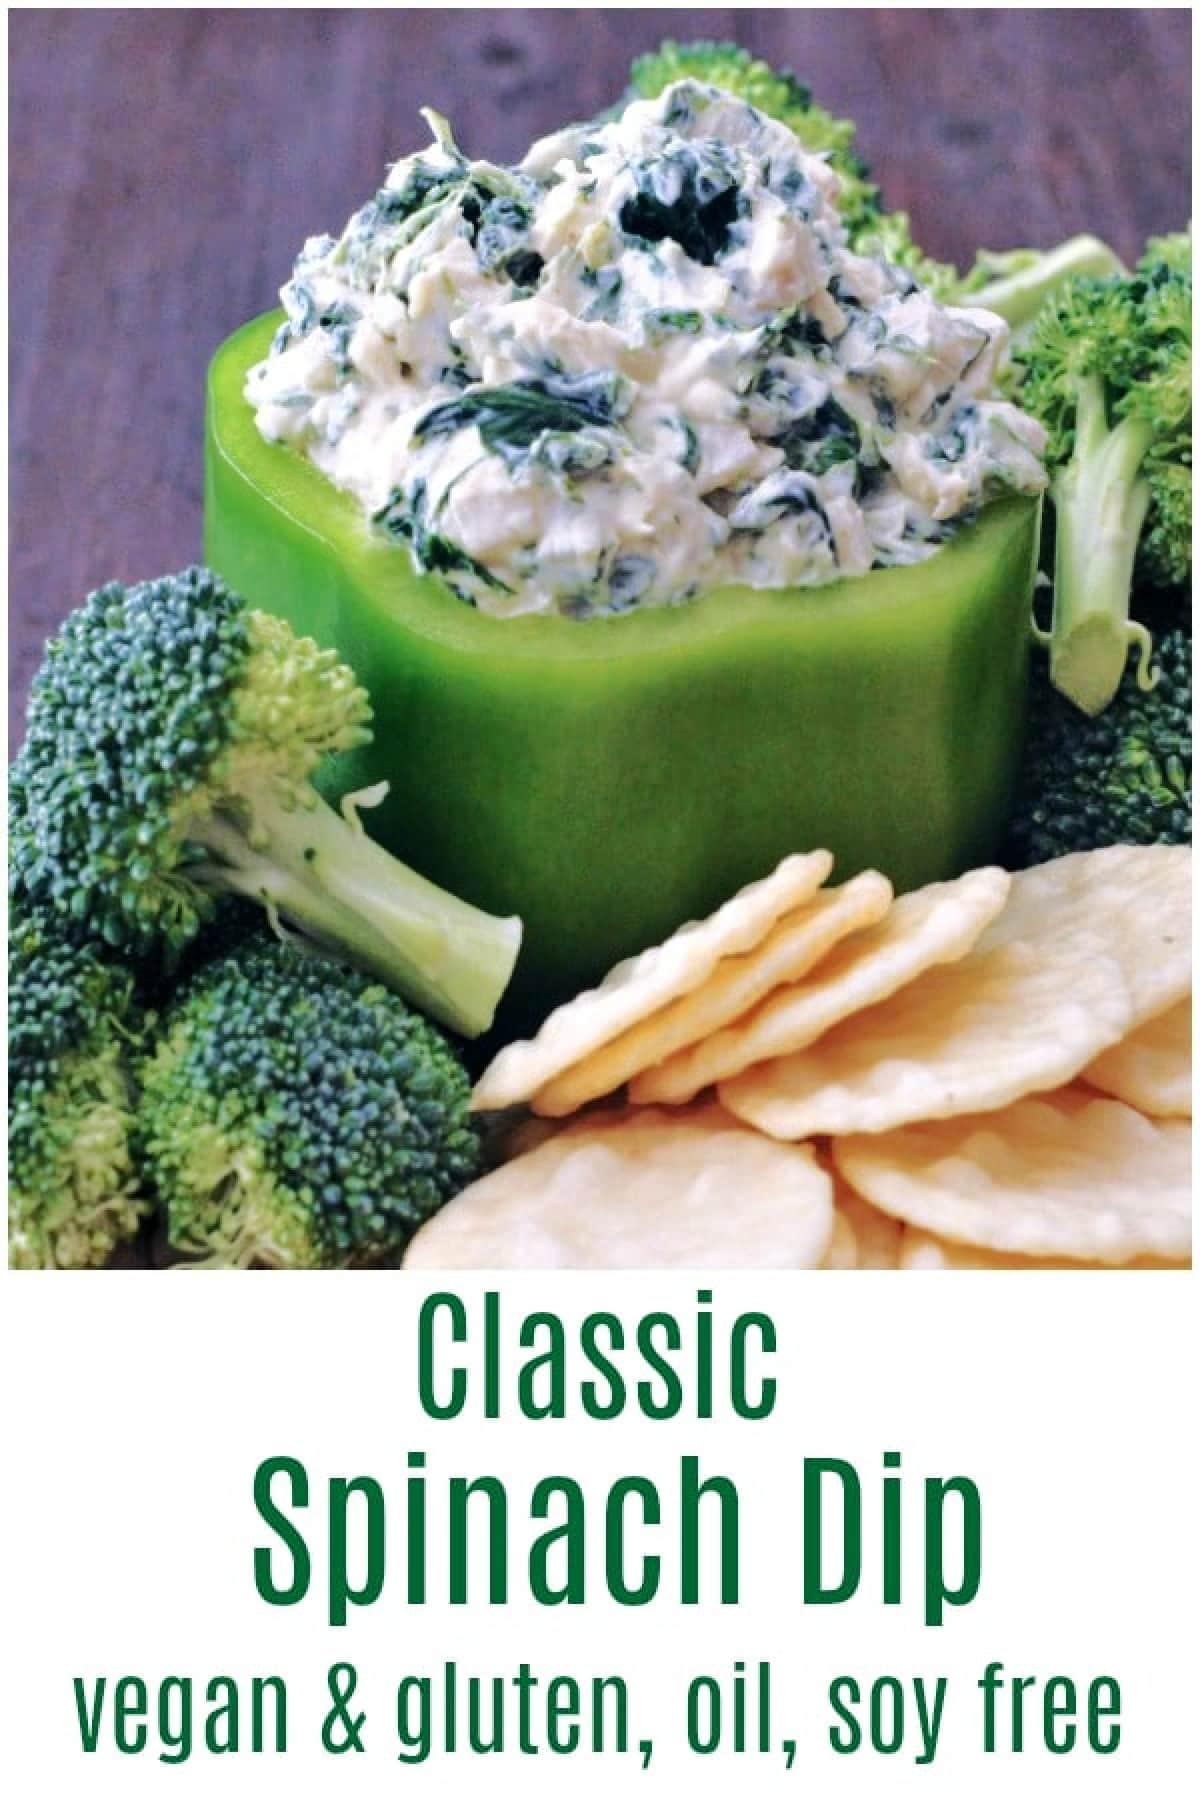 Spinach dip served in a hollowed out green bell pepper, with fresh broccoli trees and rice crackers for dipping.